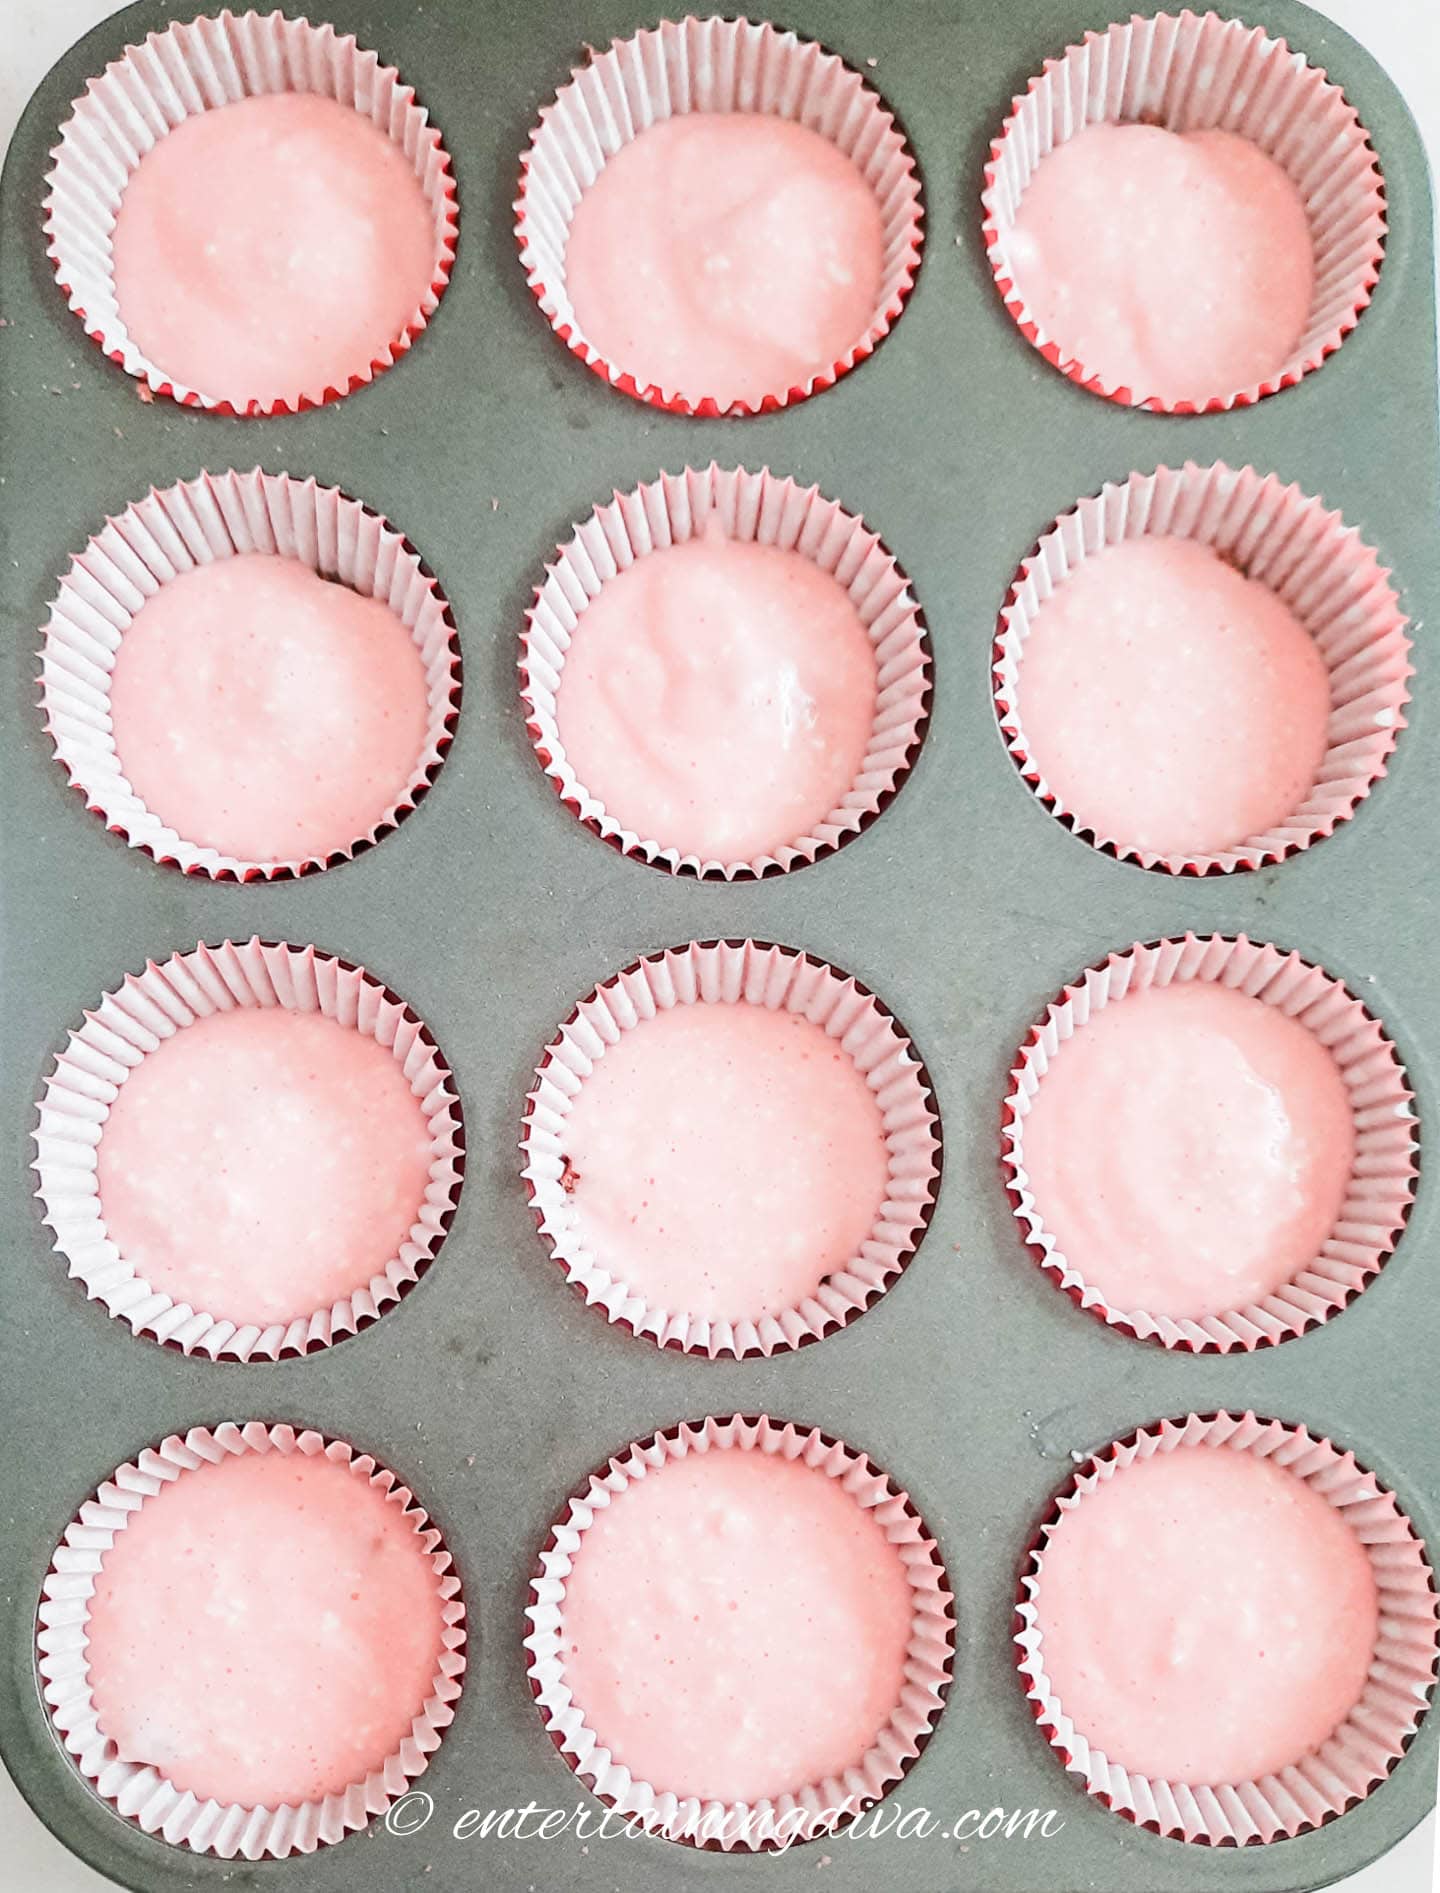 The peppermint cheesecake batter in cupcake tins